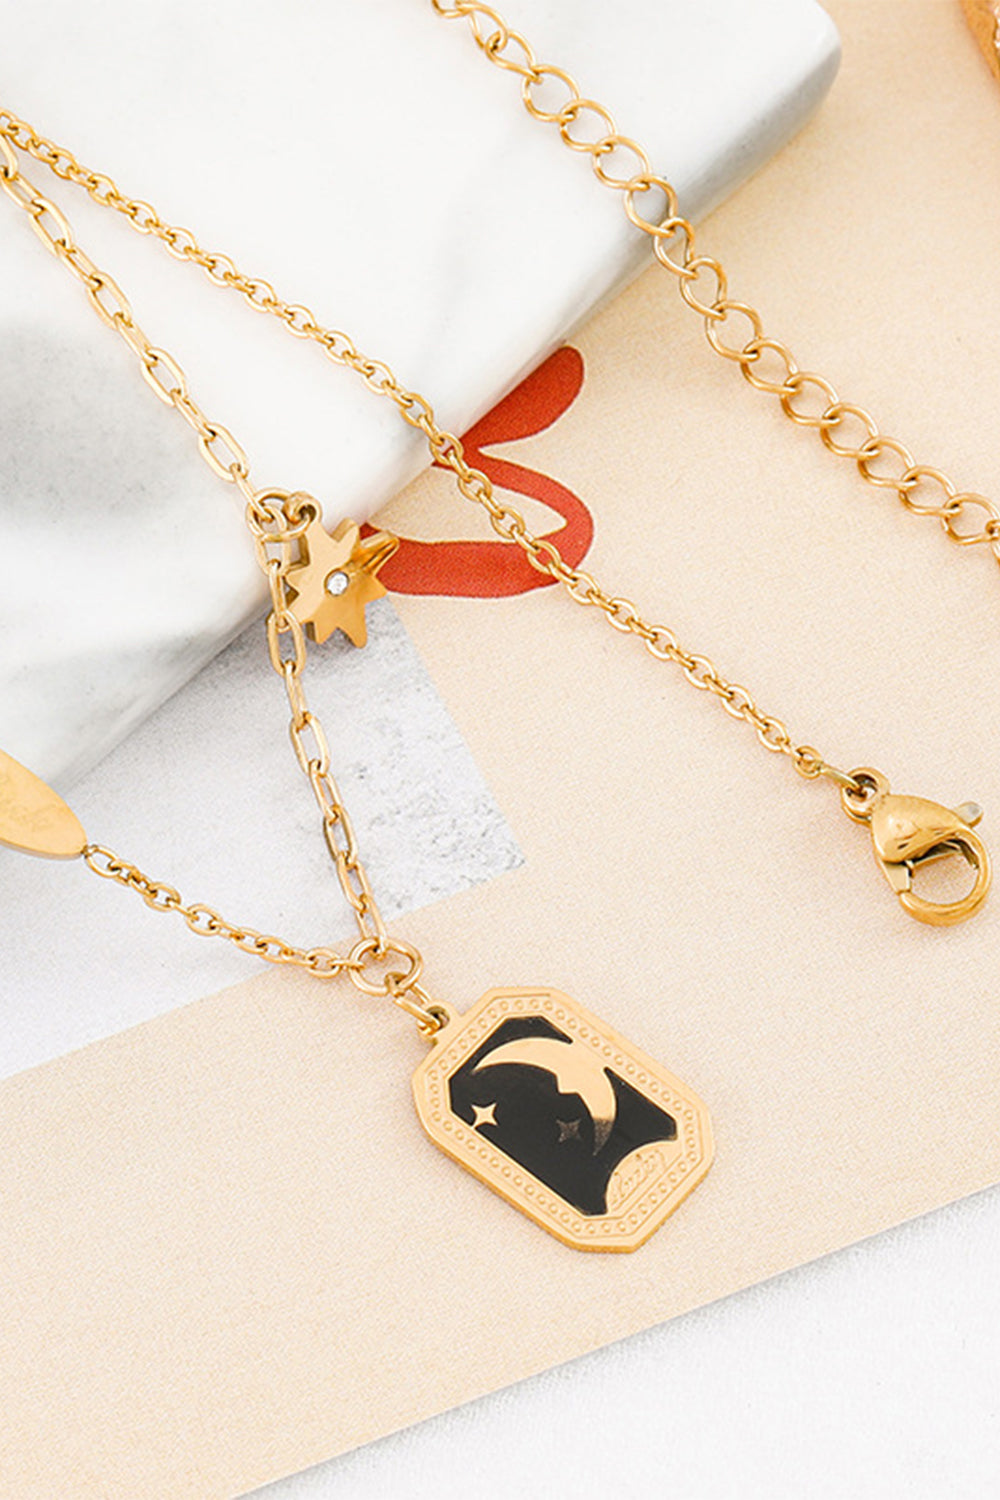 Gold Enamel Necklace Clavicle Chain